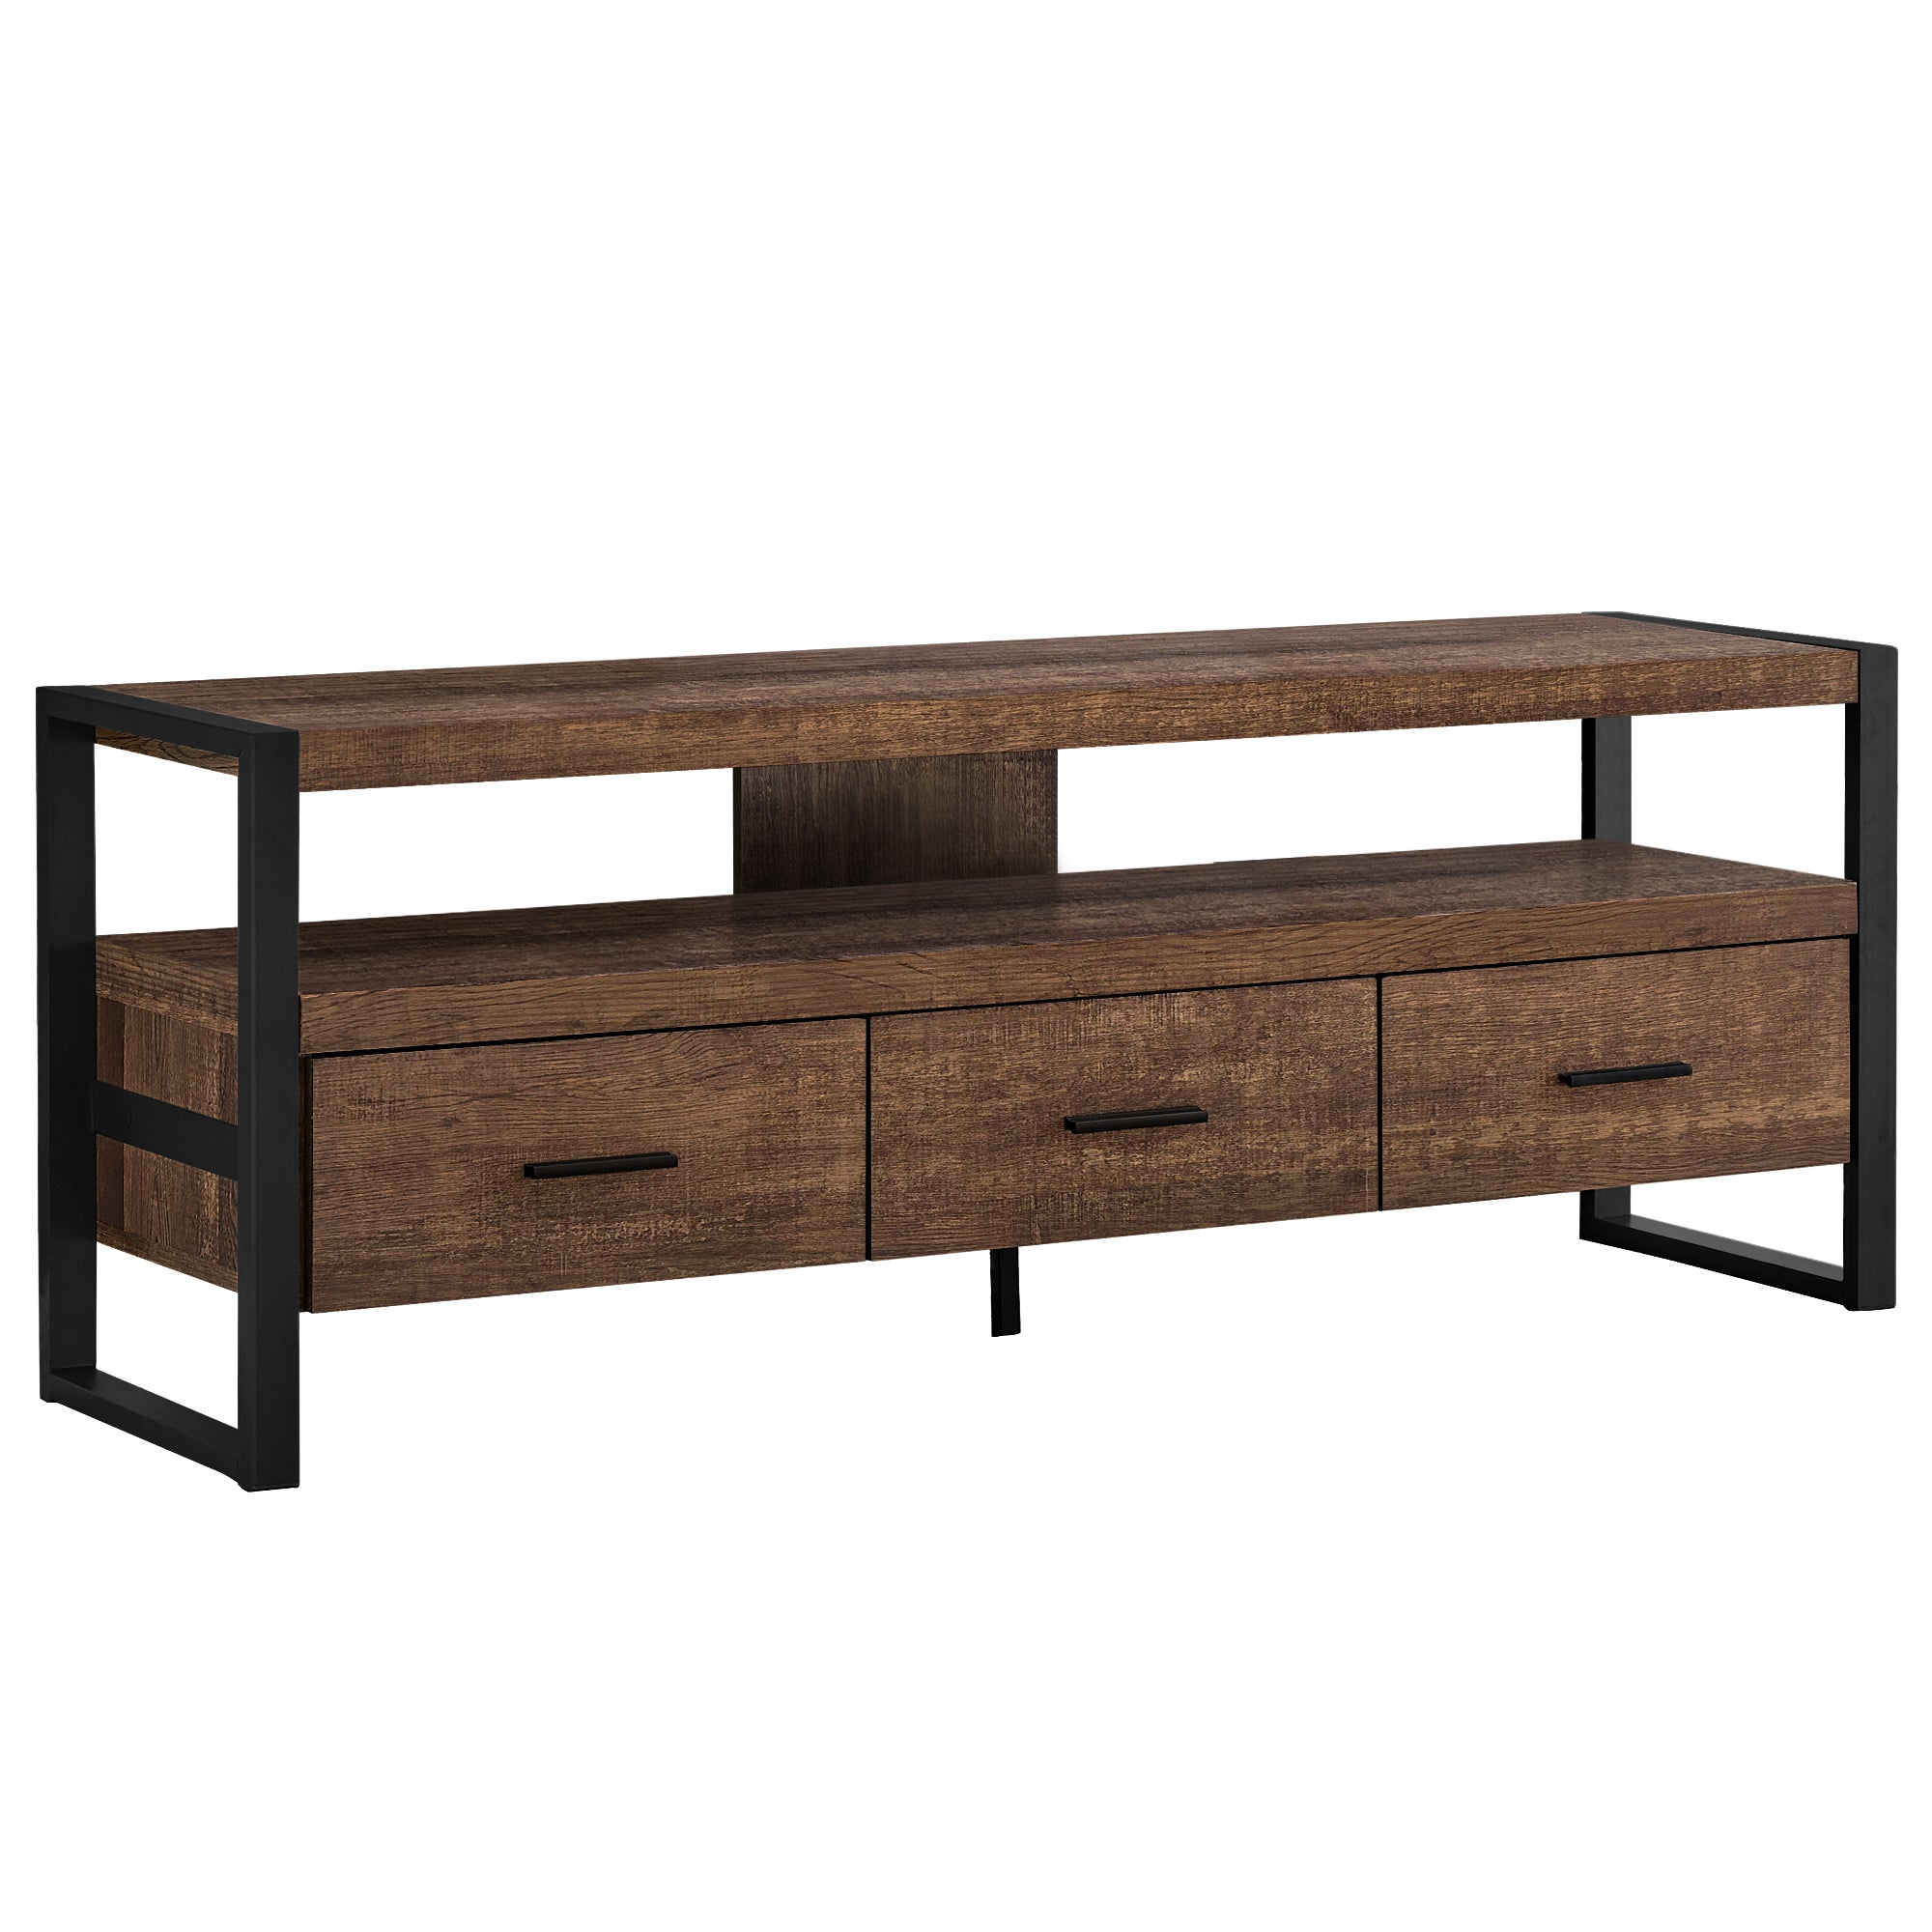 TV STAND - 60"L / BROWN RECLAIMED WOOD-LOOK / 3 DRAWERS